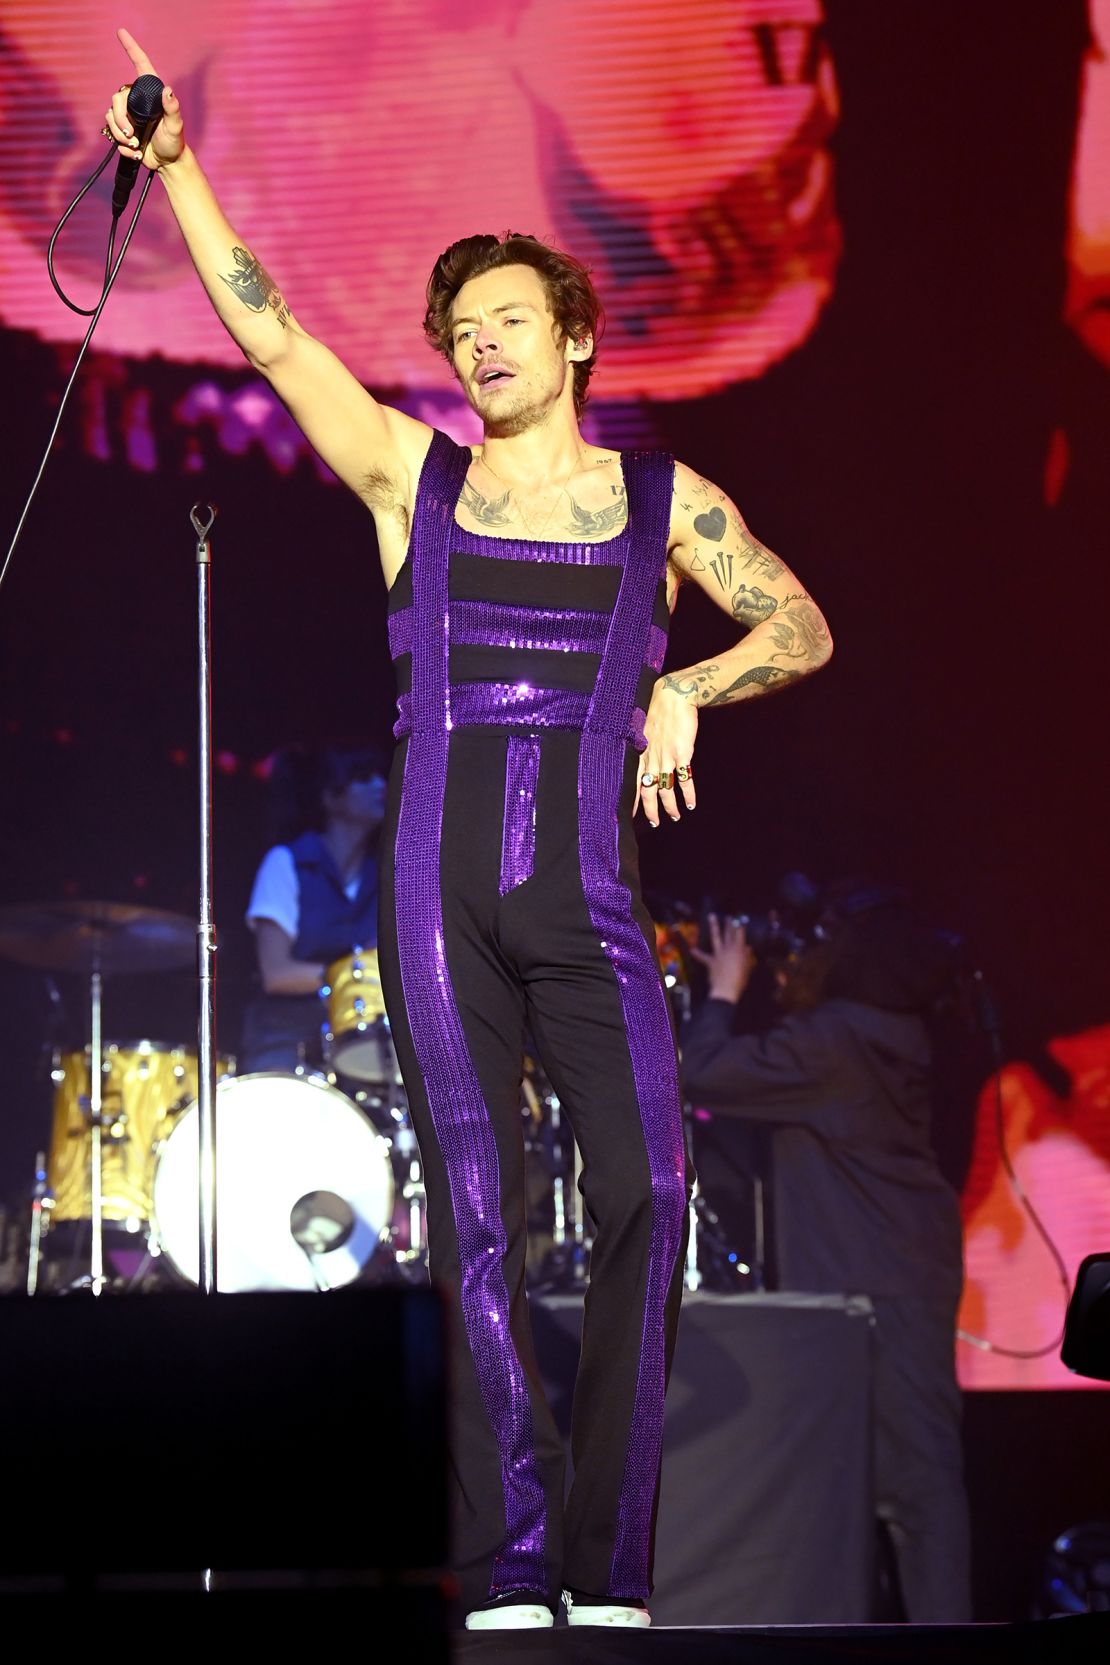 Styles' on-stage wardrobe often includes a fitted jumpsuit, as pictured here performing at BBC Radio One's Big Weekend festival in 2022.